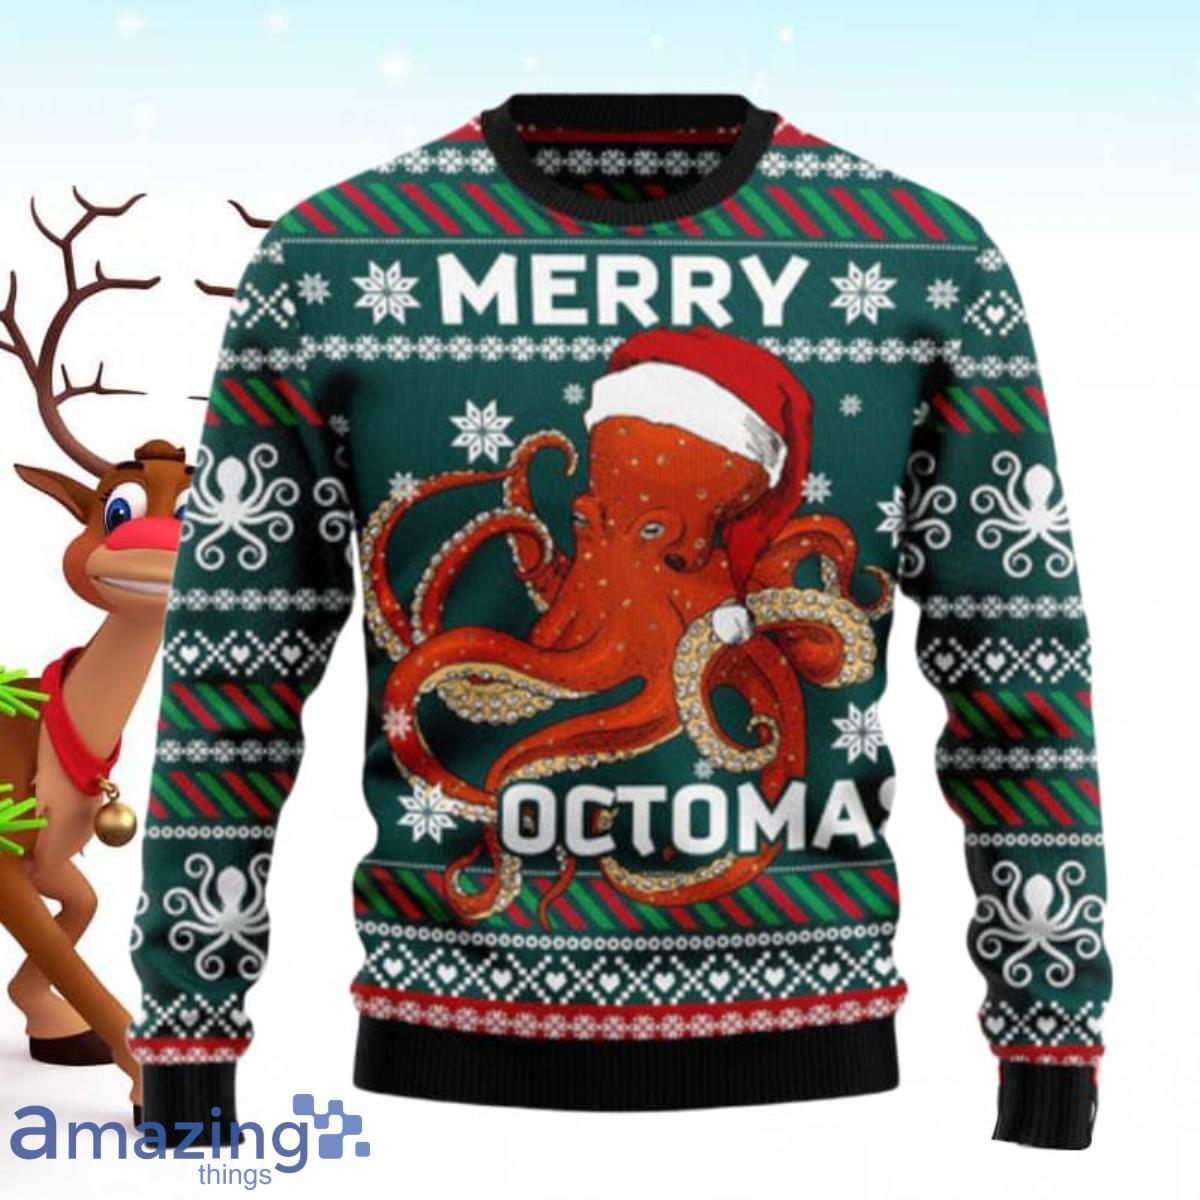 Merry Octomas Ugly Christmas Sweater Ugly Christmas Sweaters Special Gift Product Photo 1